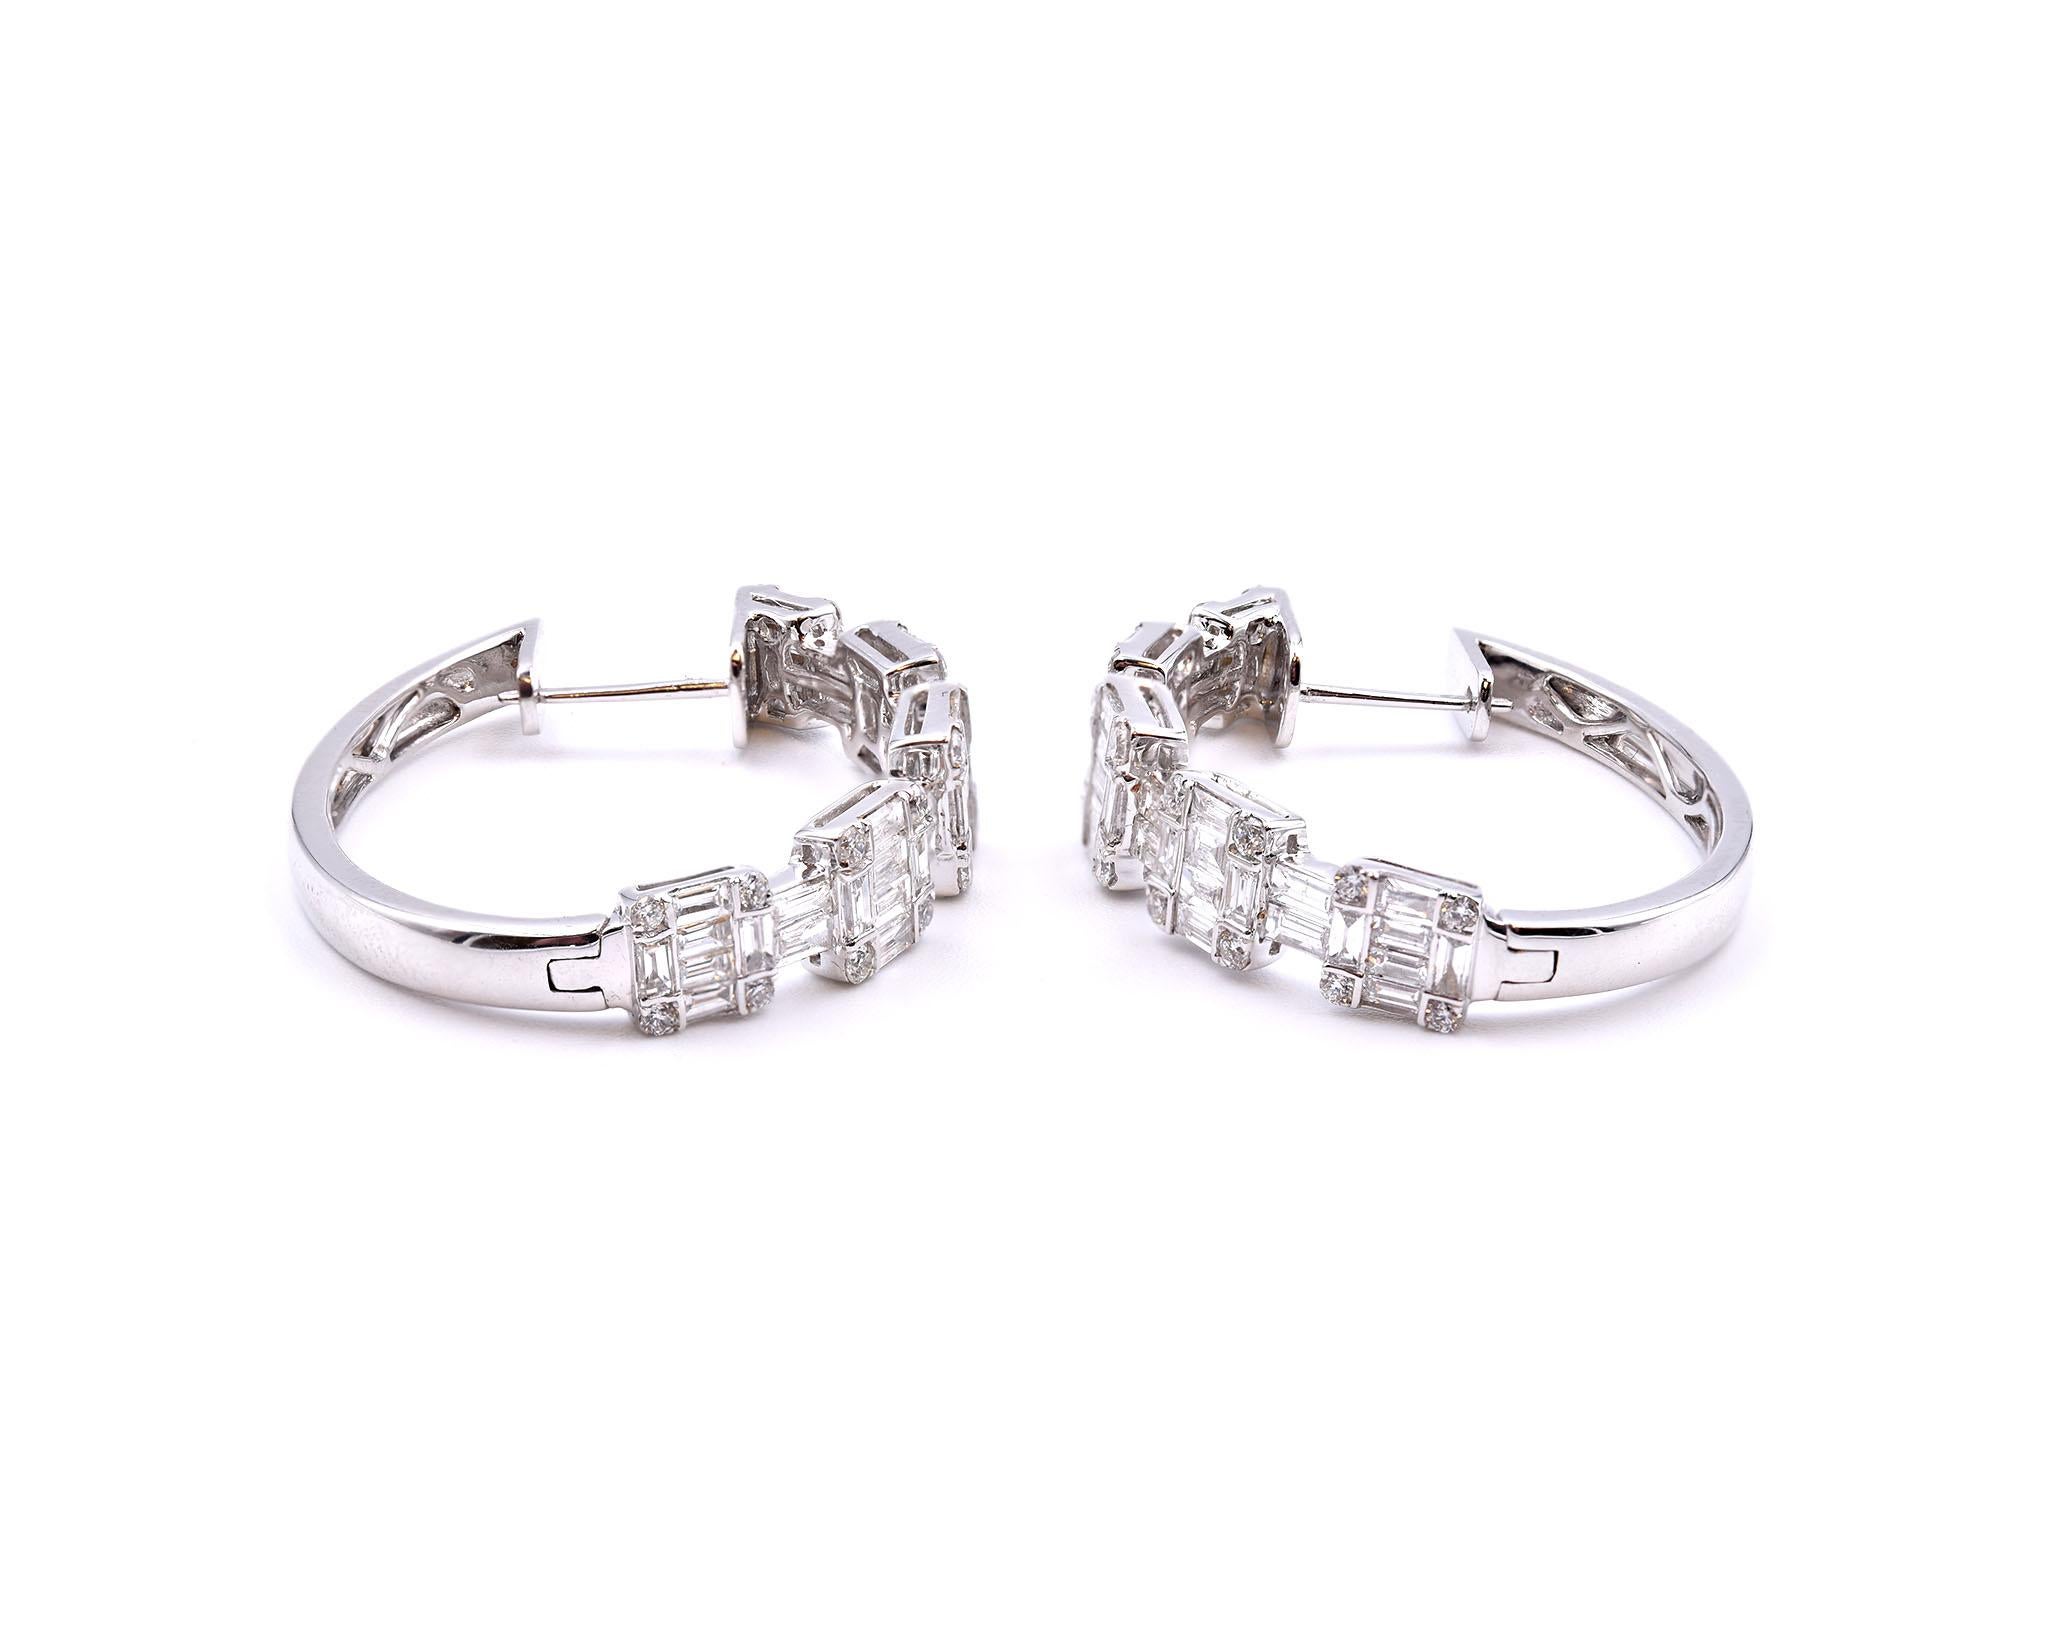 Designer: custom design
Material: 18k white gold
Diamonds: 84 baguette cut = 2.91cttw
Color: G
Clarity: VS
Diamonds: 40 round brilliant cuts = .54cttw
Color: G
Clarity: VS
Dimensions: earrings are 35mm long and 6mm-6.75mm wide
Fastenings: post with